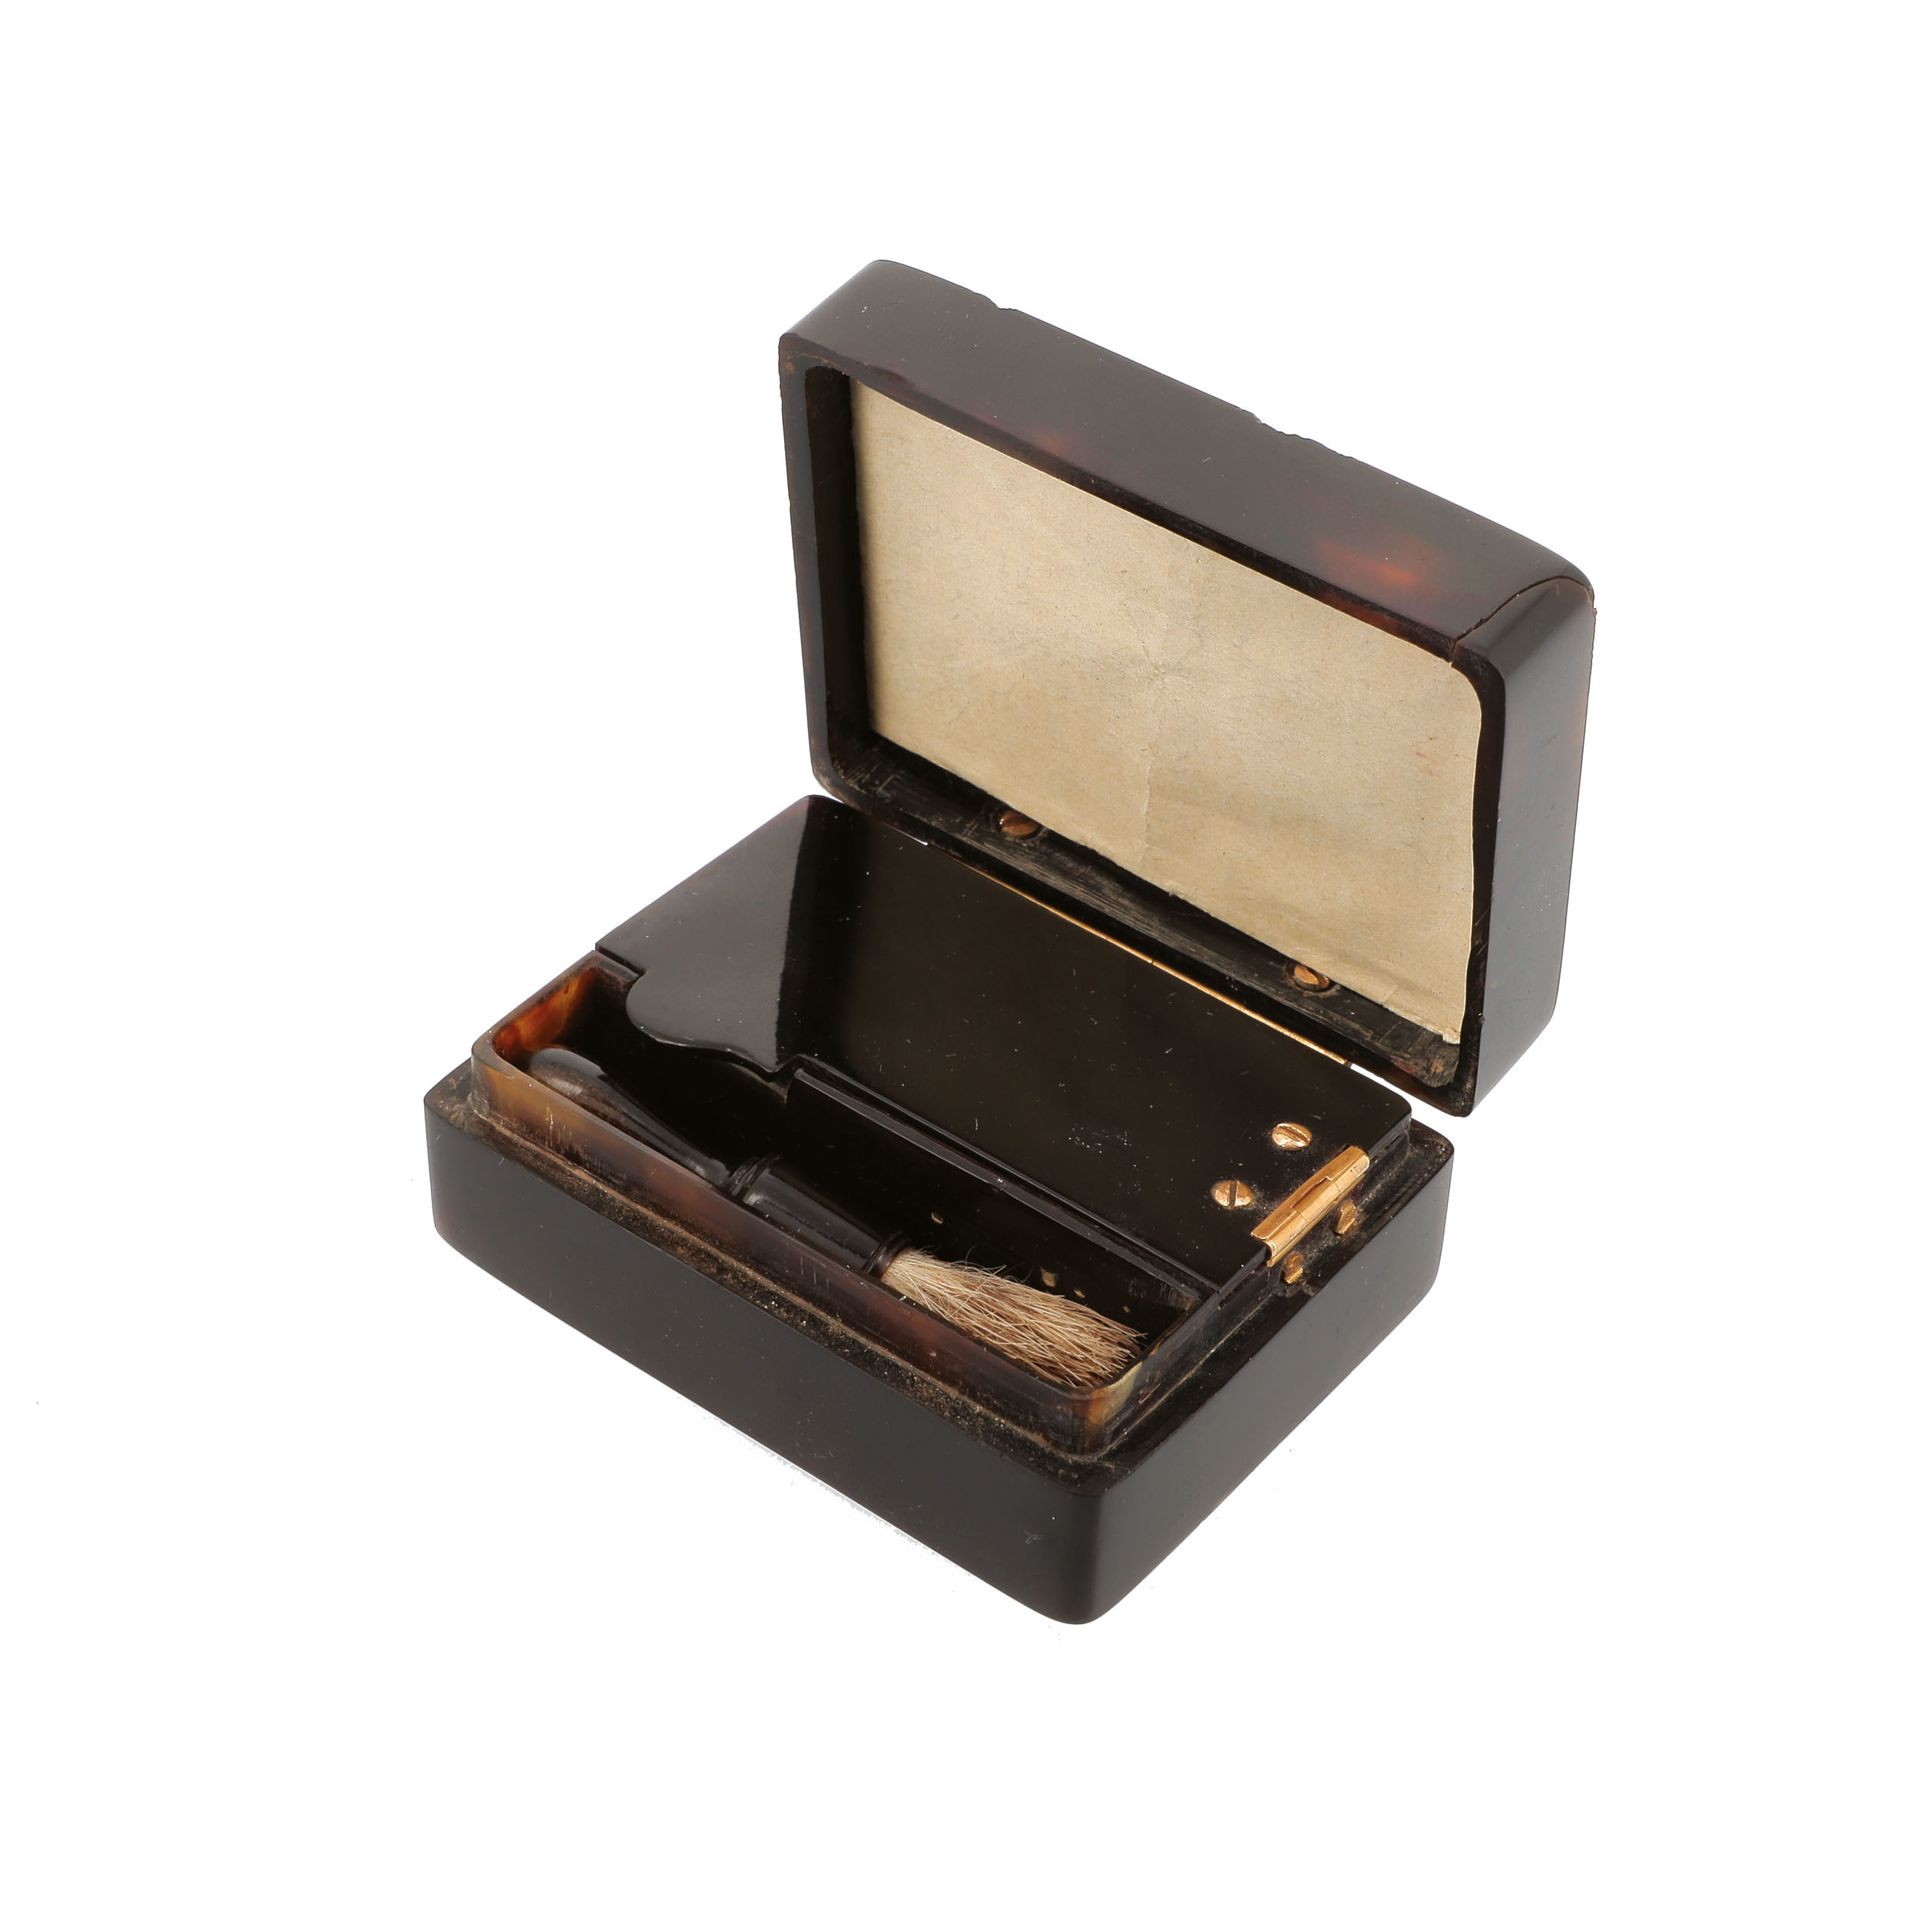 Null FLIES BOX

In tortoiseshell, punctuated with gold pastilles on the lid, and&hellip;